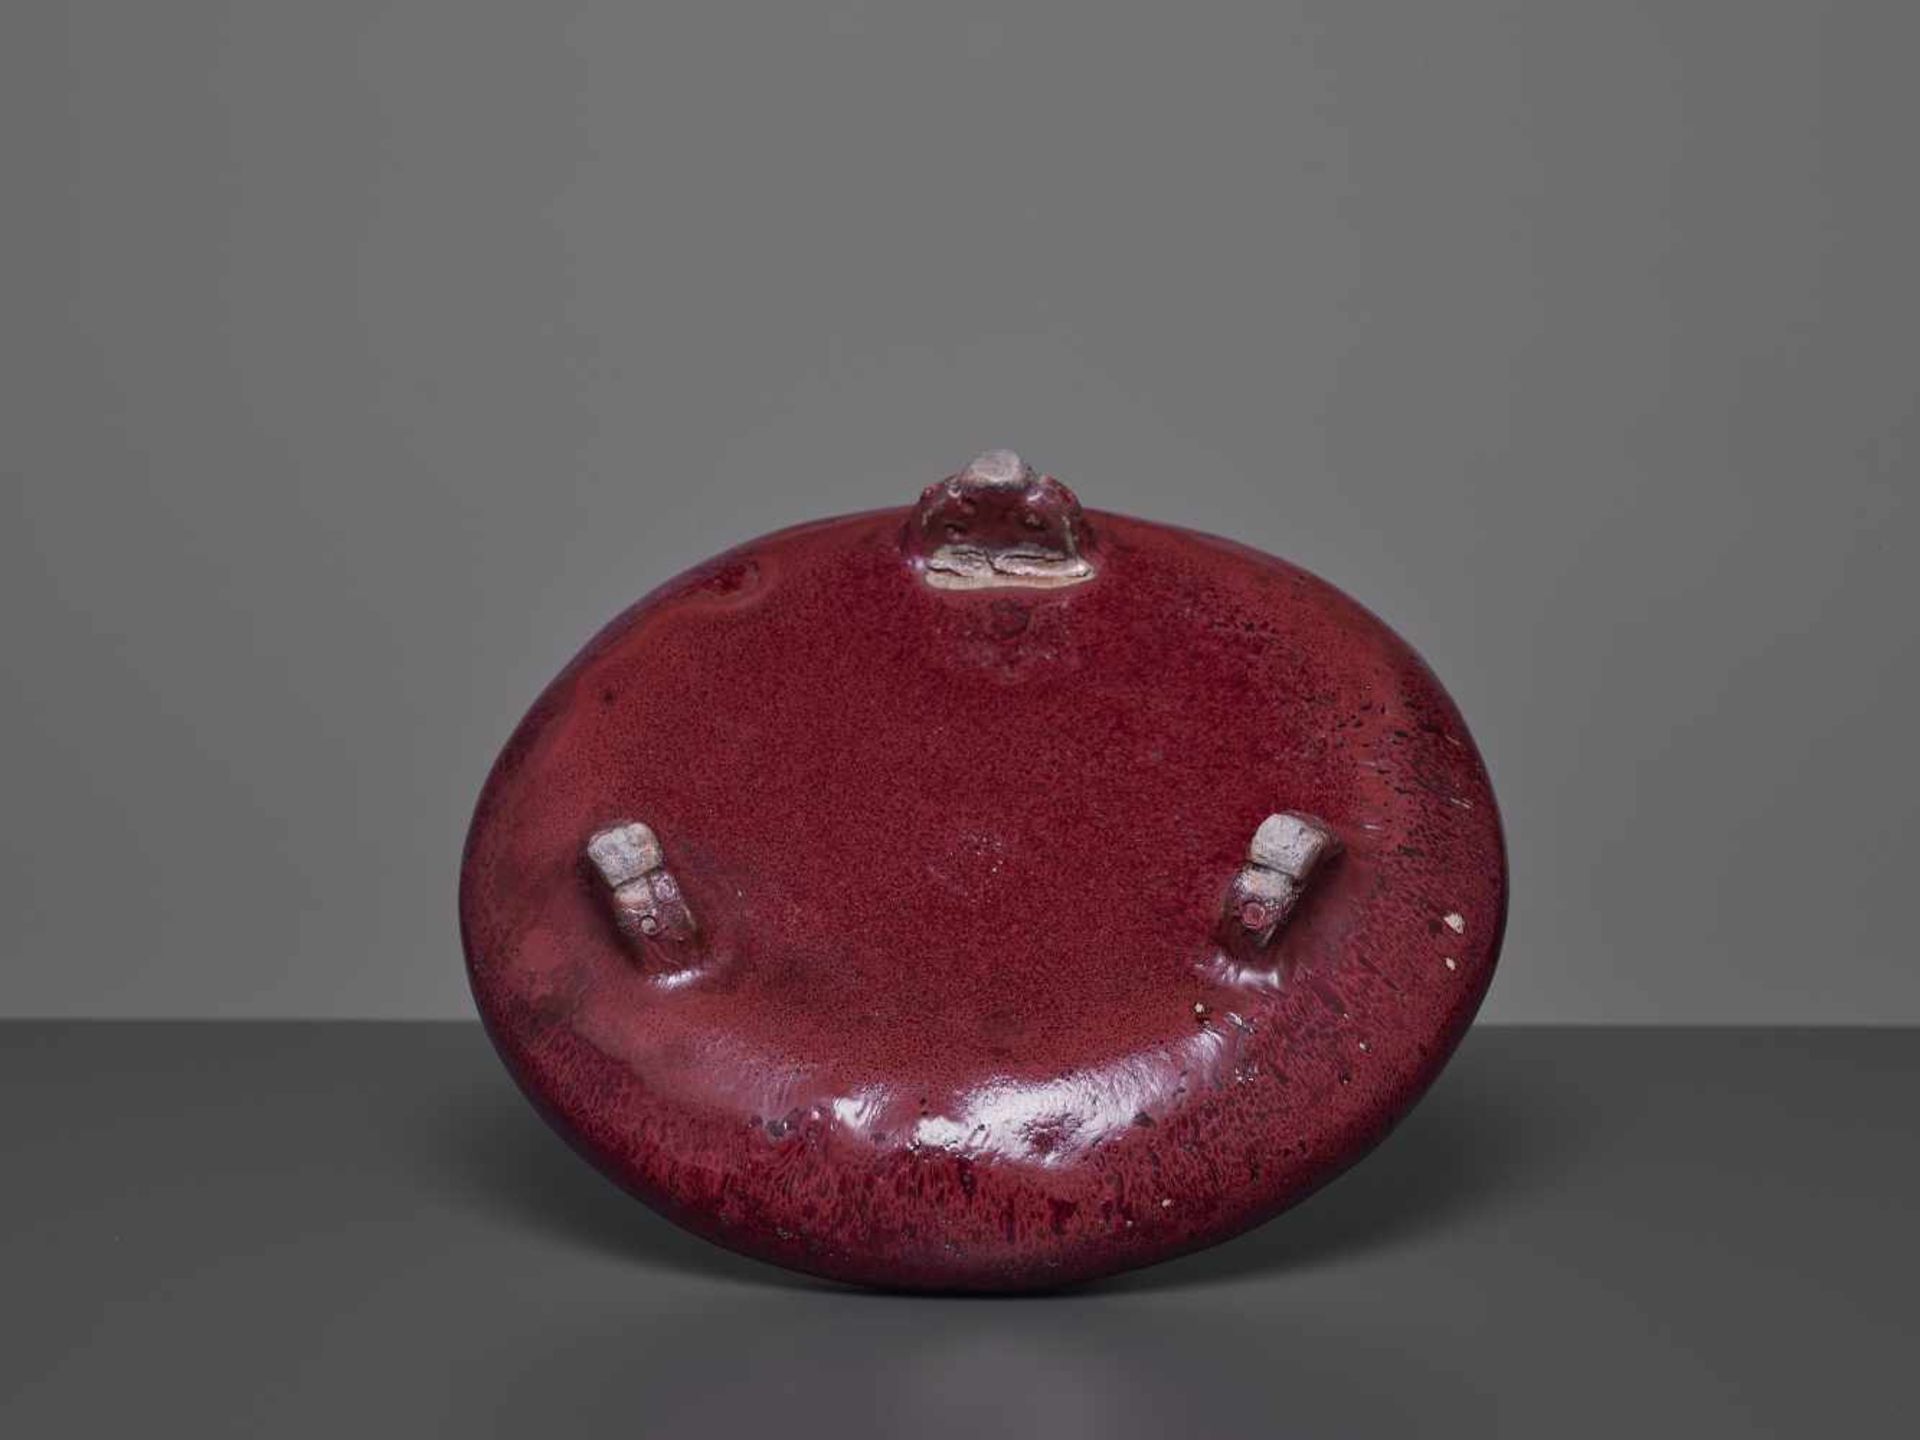 A LANGYAO CERAMIC BOWL, QING DYNASTYChina, 18th - 19th century. Vitreous deep-red glaze, featuring - Image 4 of 6